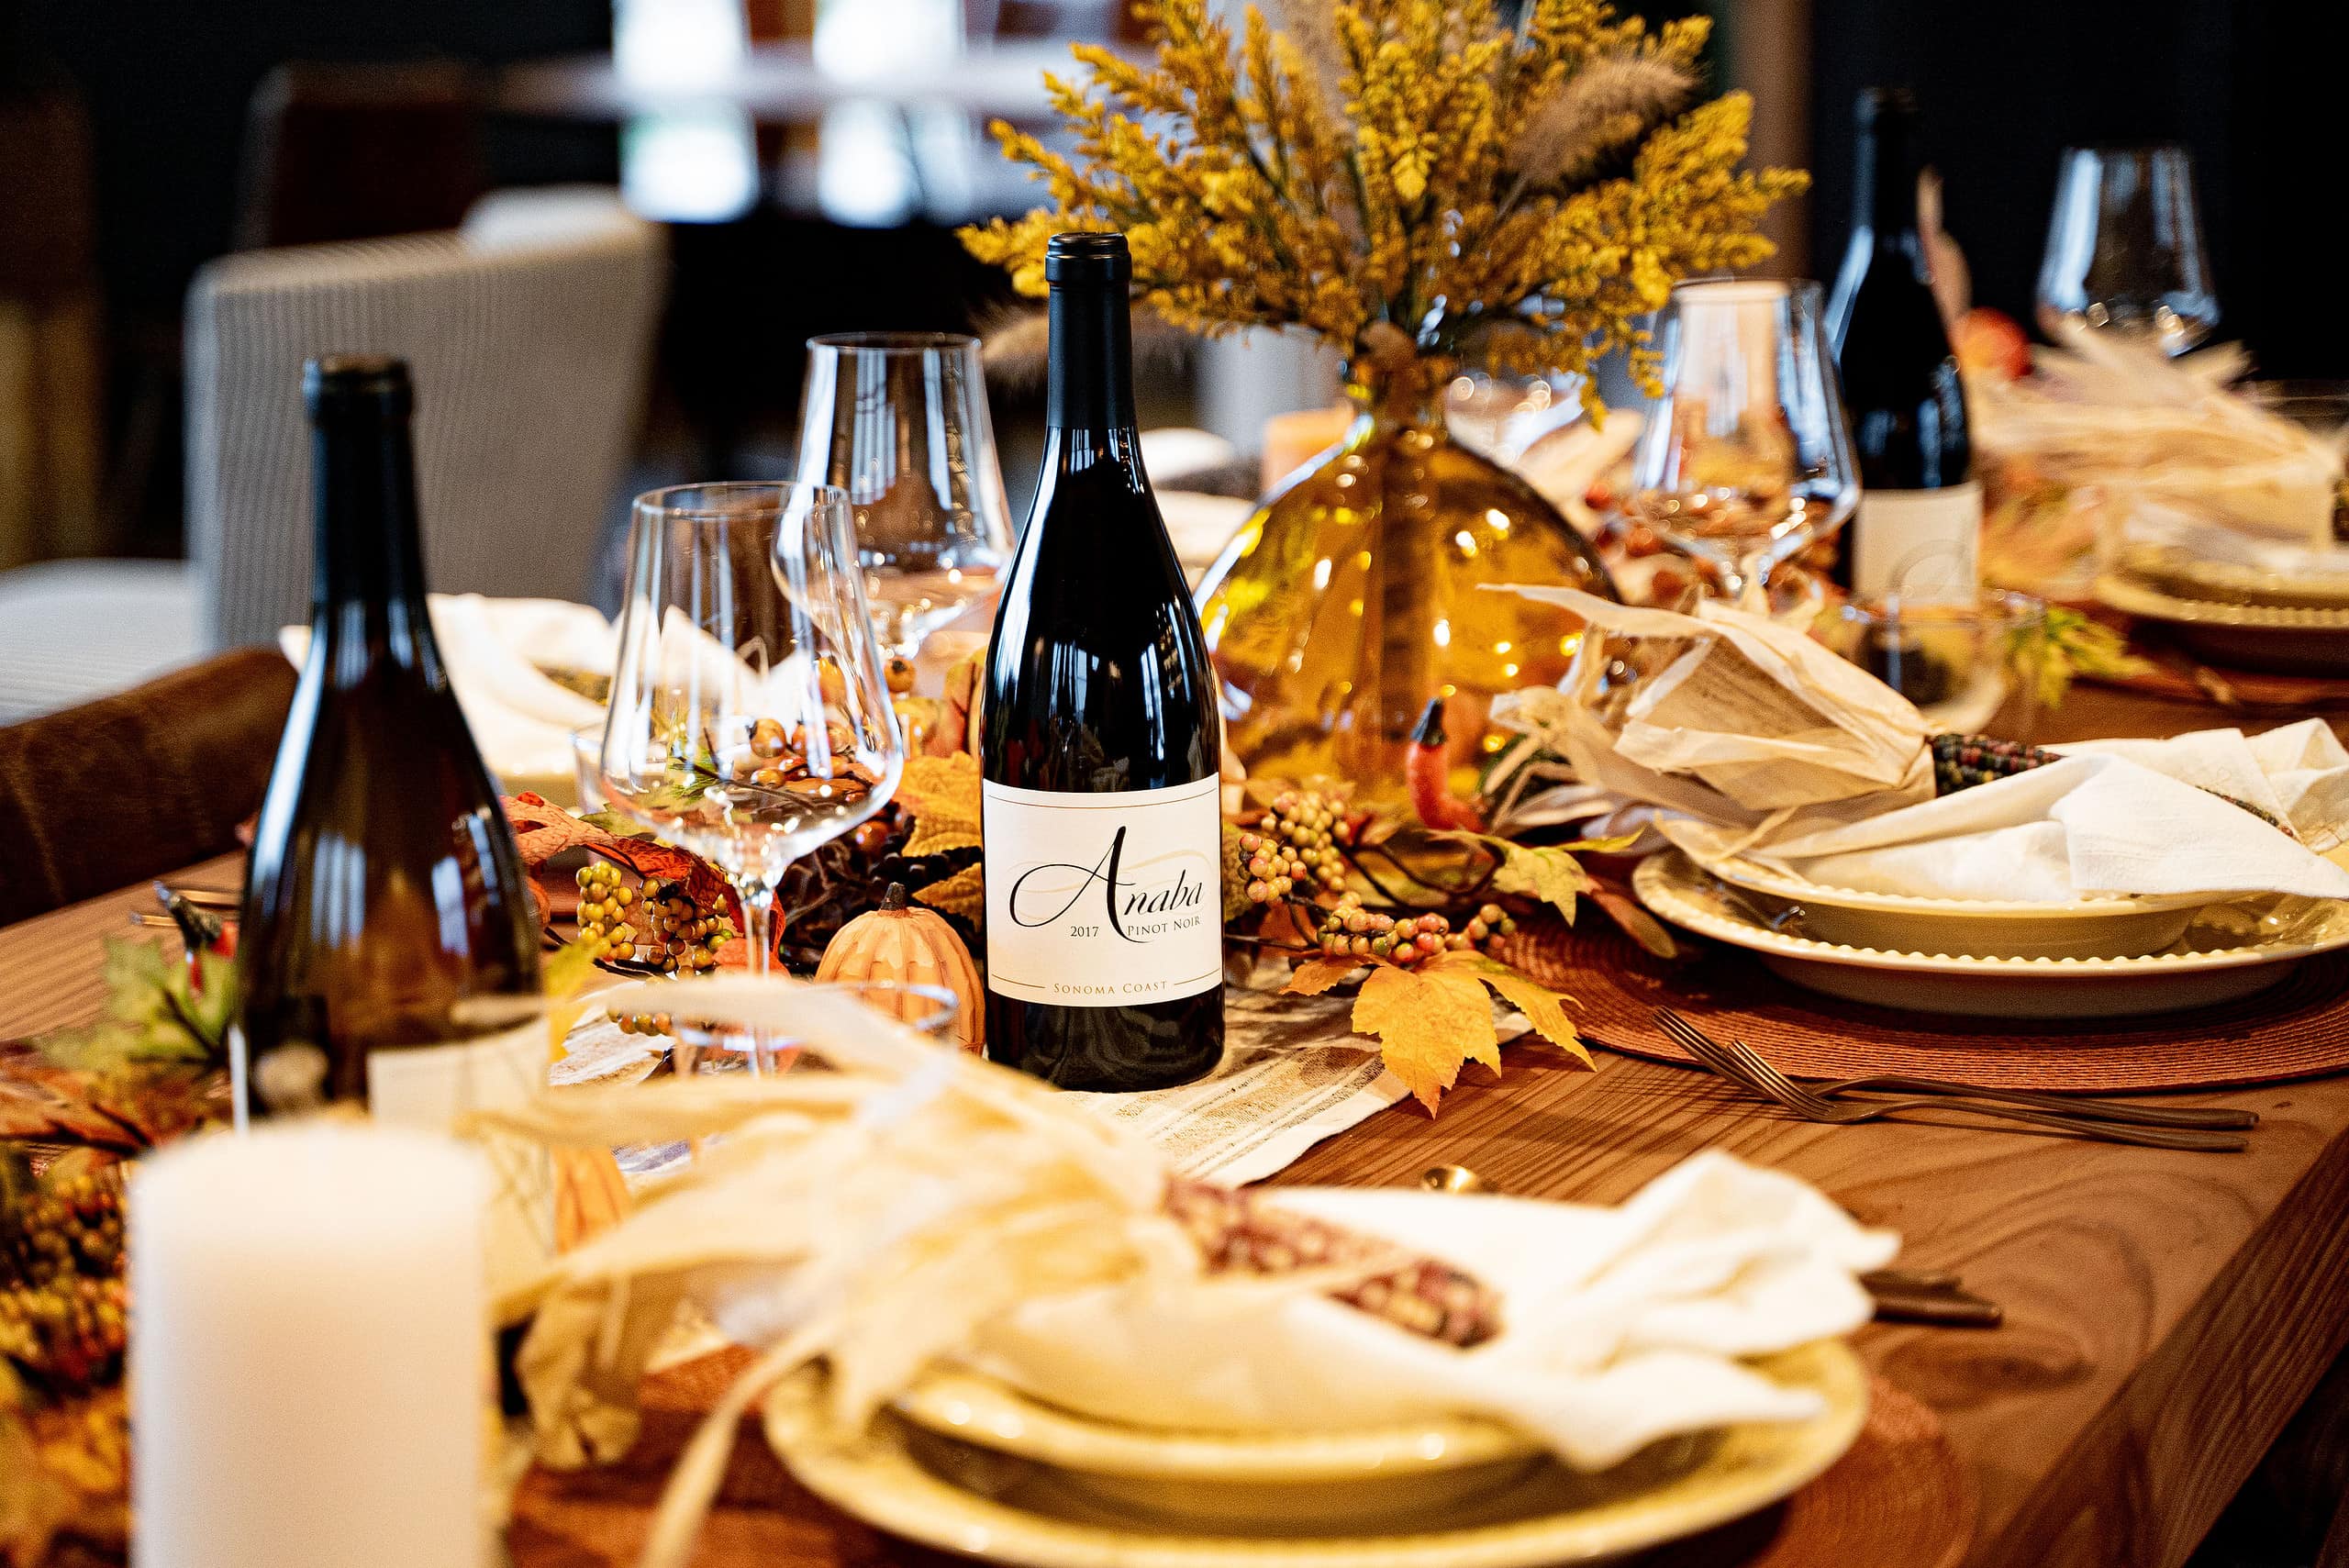 A thanksgiving dinner table is set with several Anaba wine bottles.